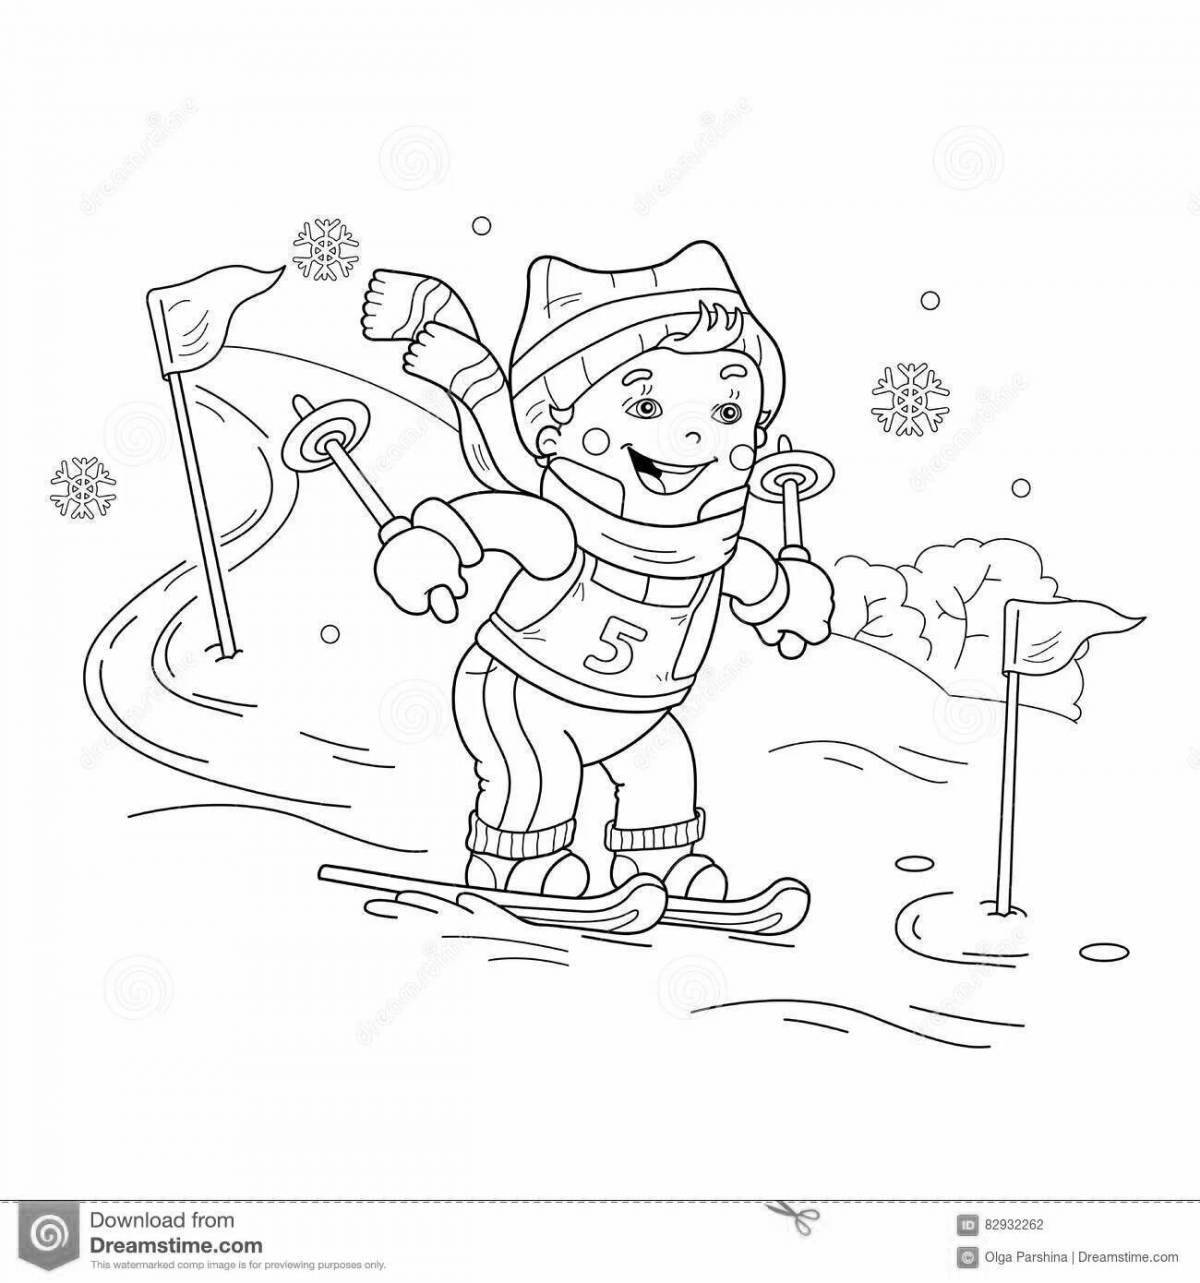 Exciting winter sports coloring book for 6-7 year olds